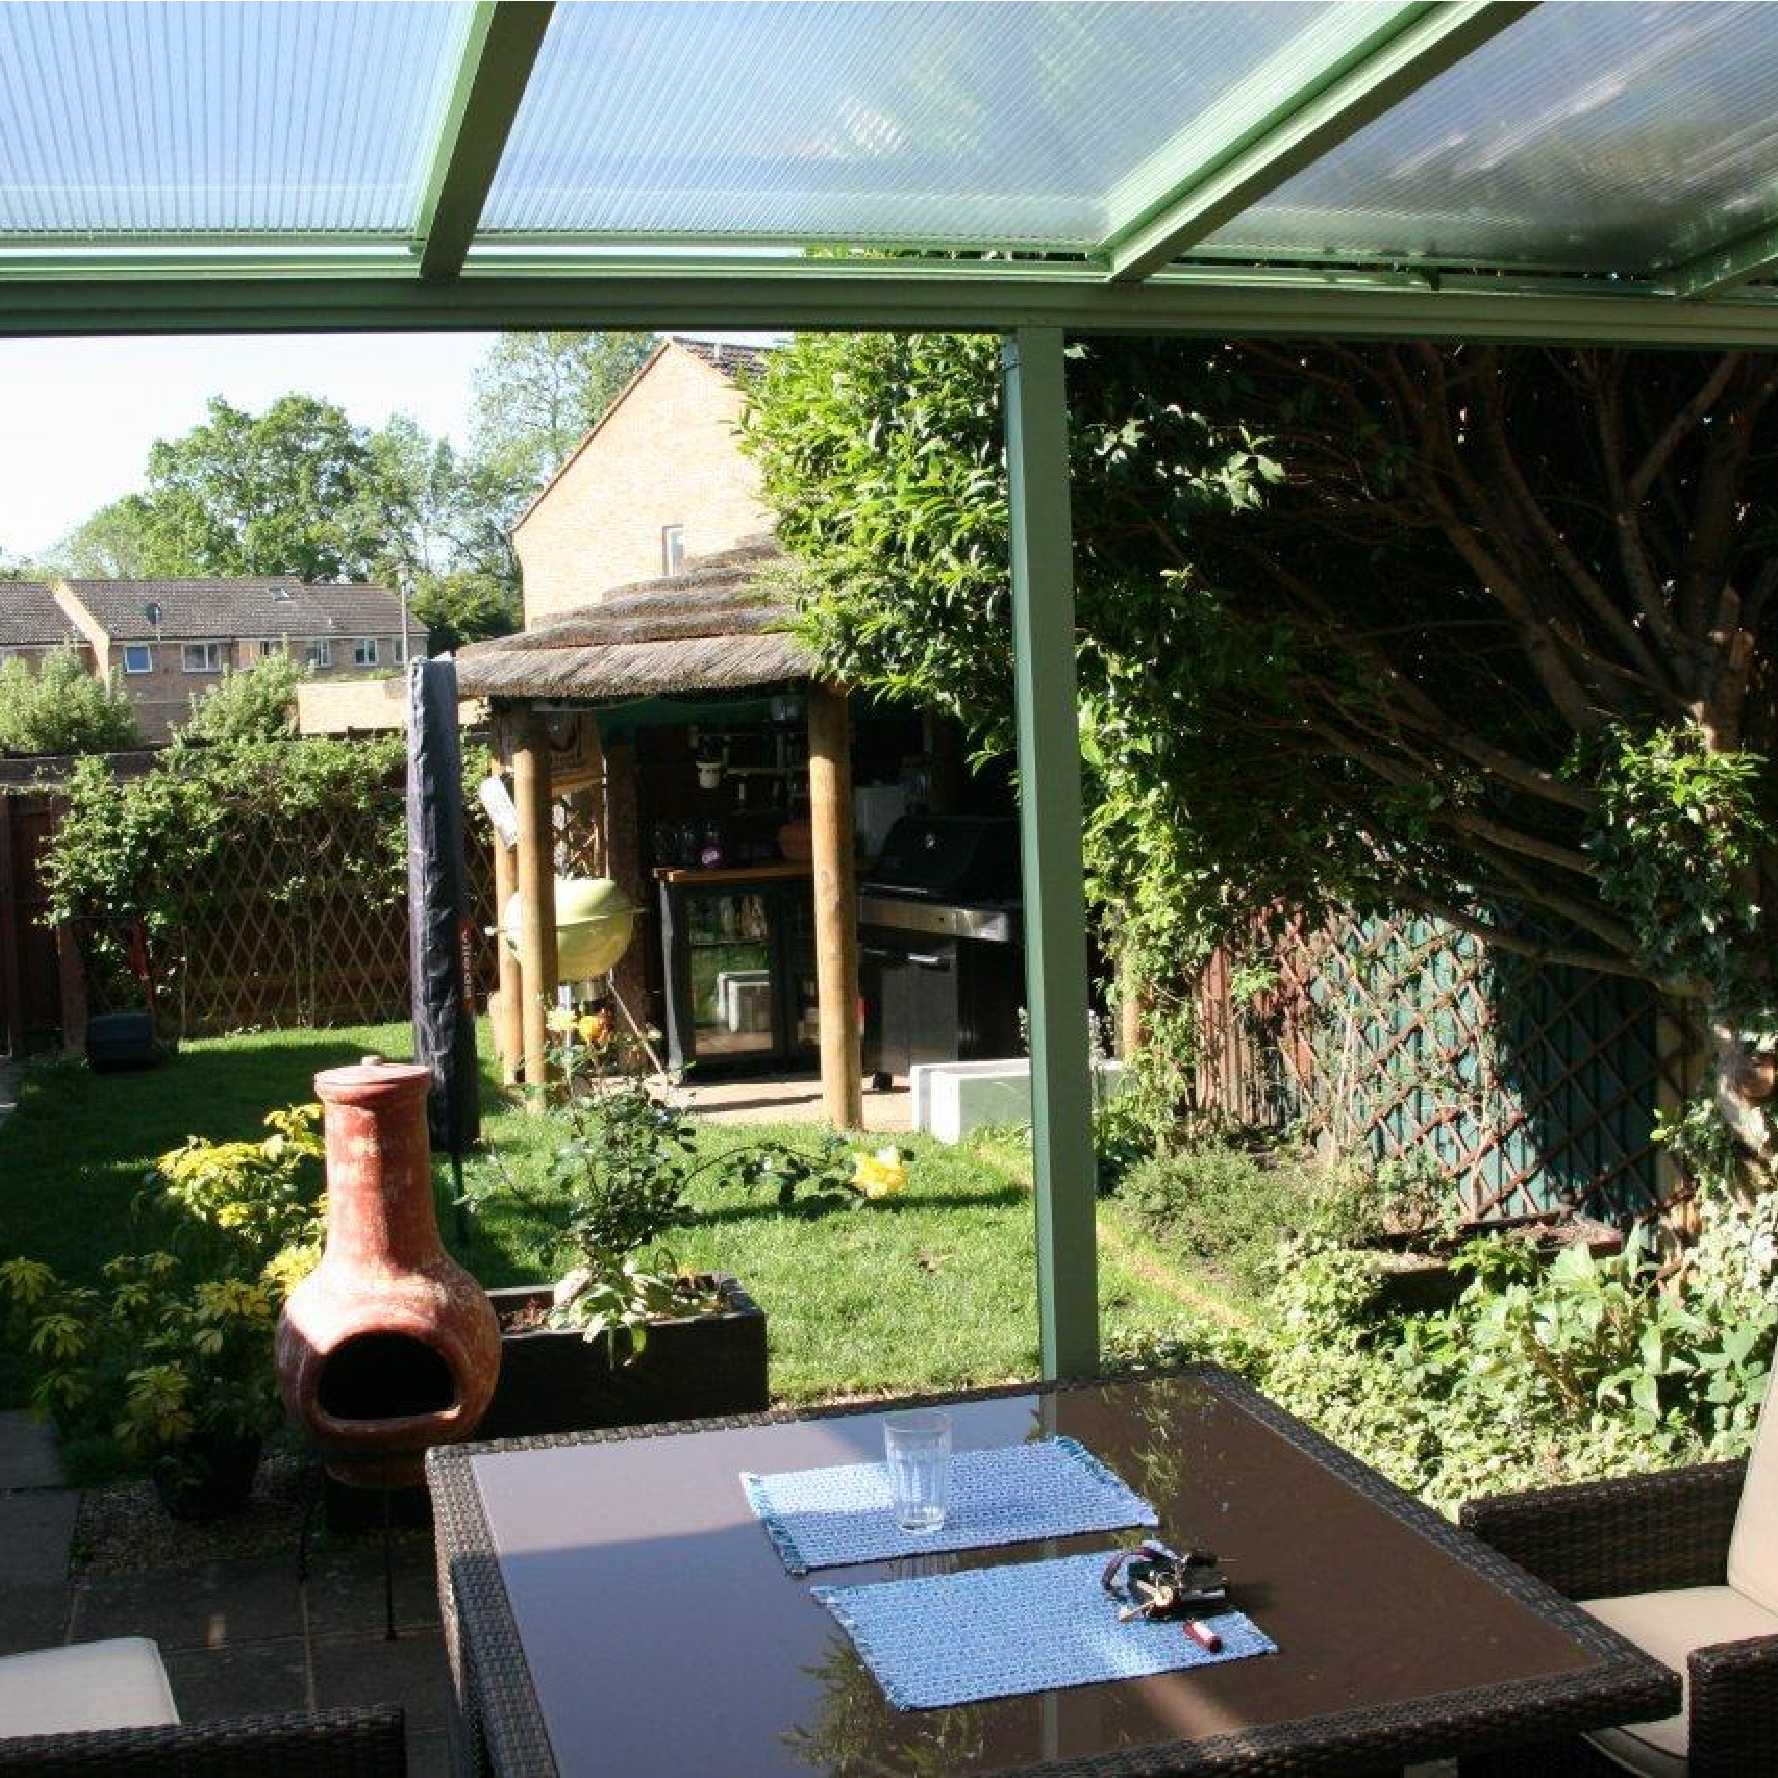 Affordable Omega Smart Lean-To Canopy, White with 16mm Polycarbonate Glazing - 4.9m (W) x 3.5m (P), (3) Supporting Posts